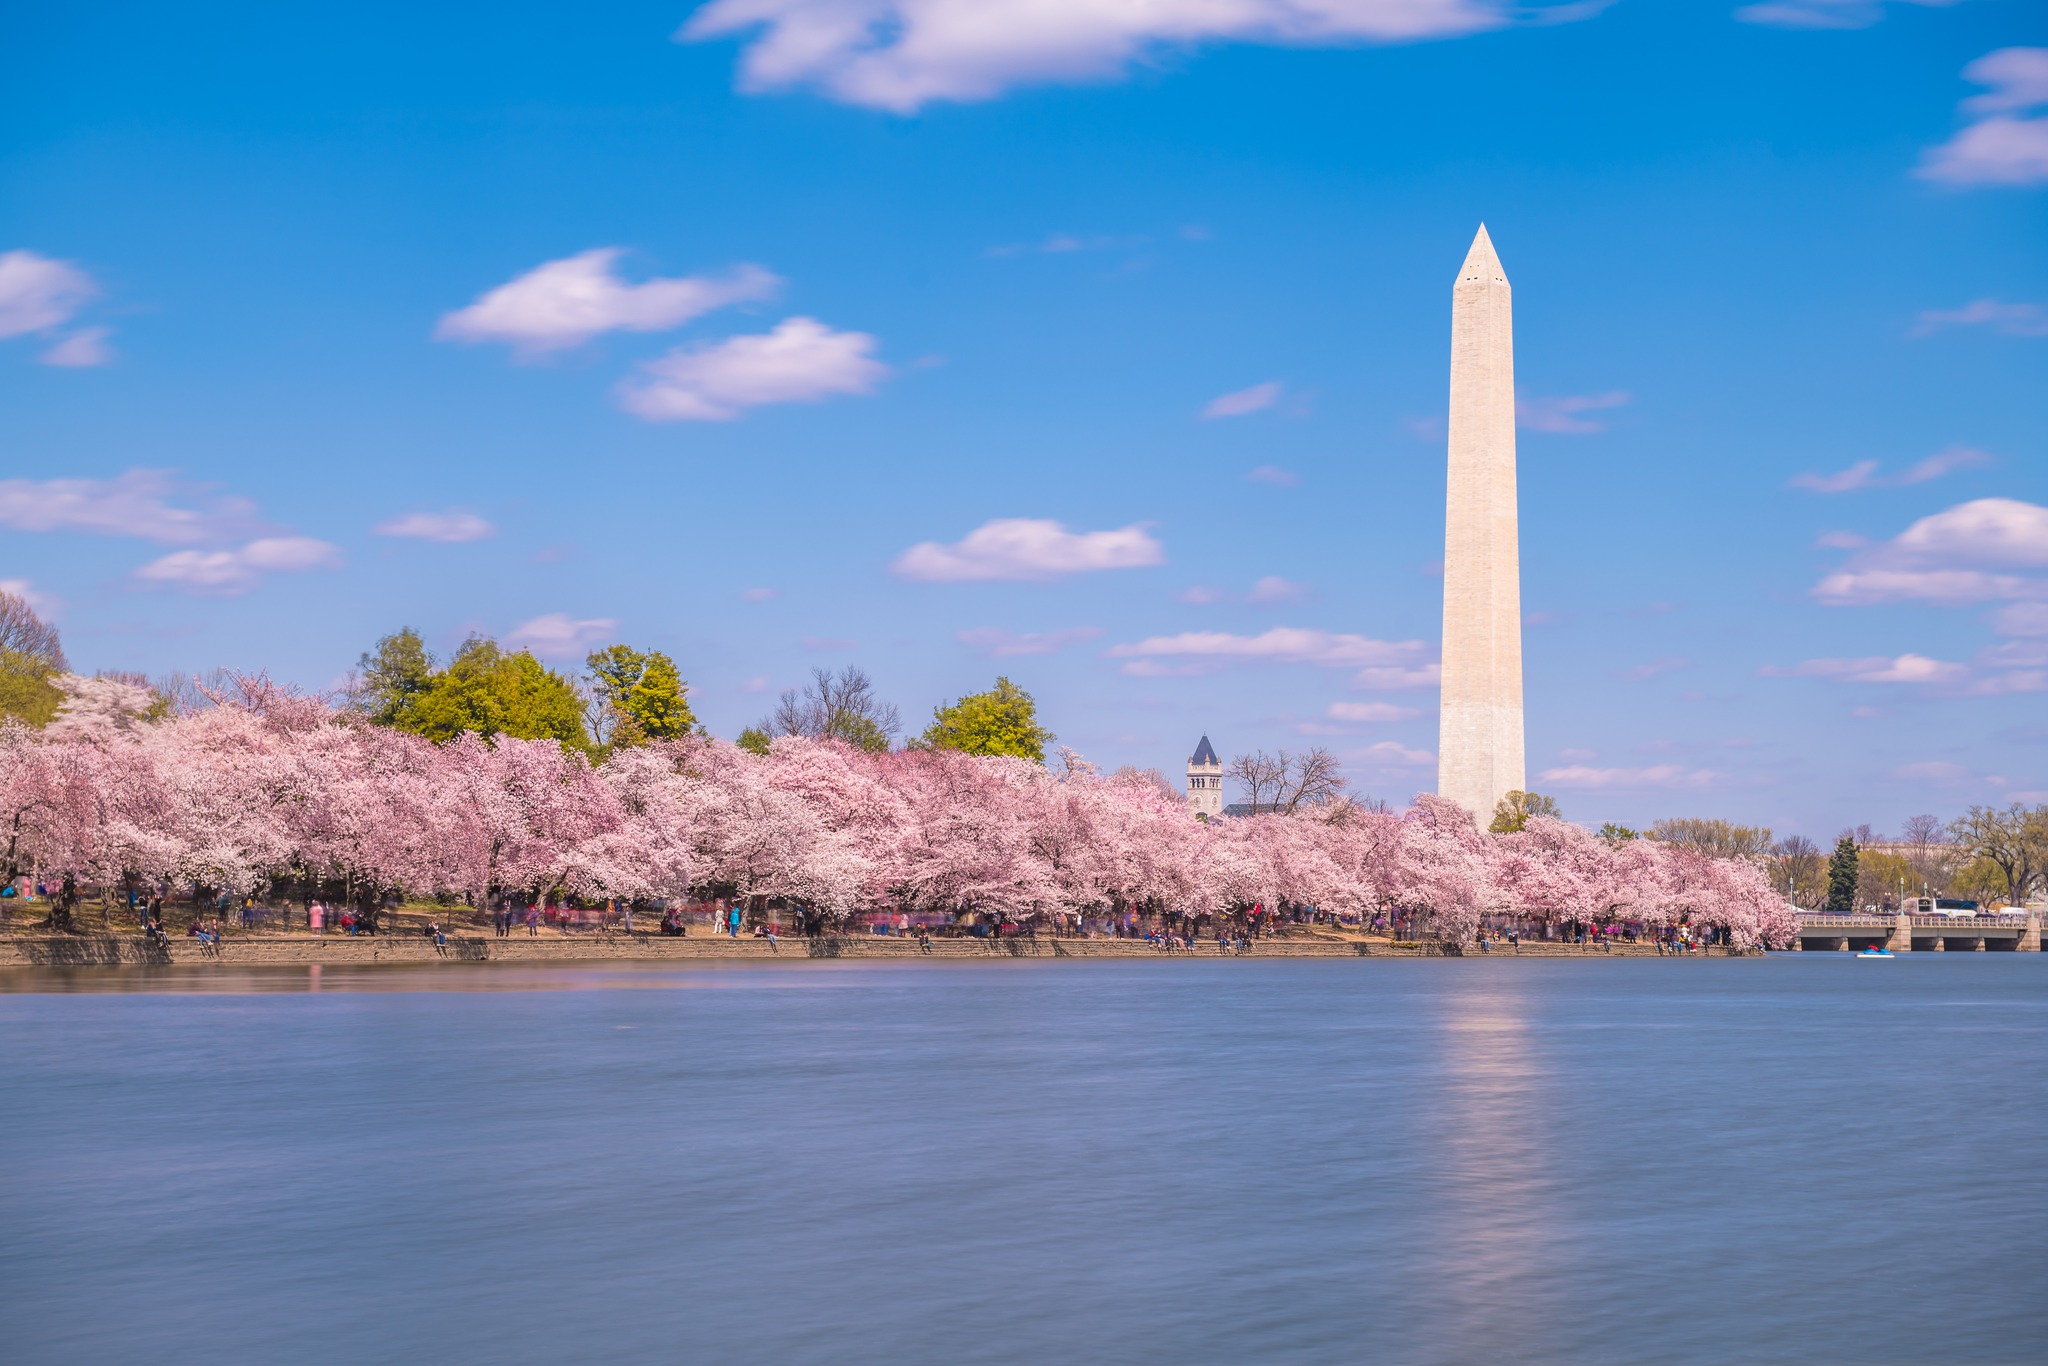 DC Cherry Blossom Festival Moved up to Mid-March Due to Warm Winter